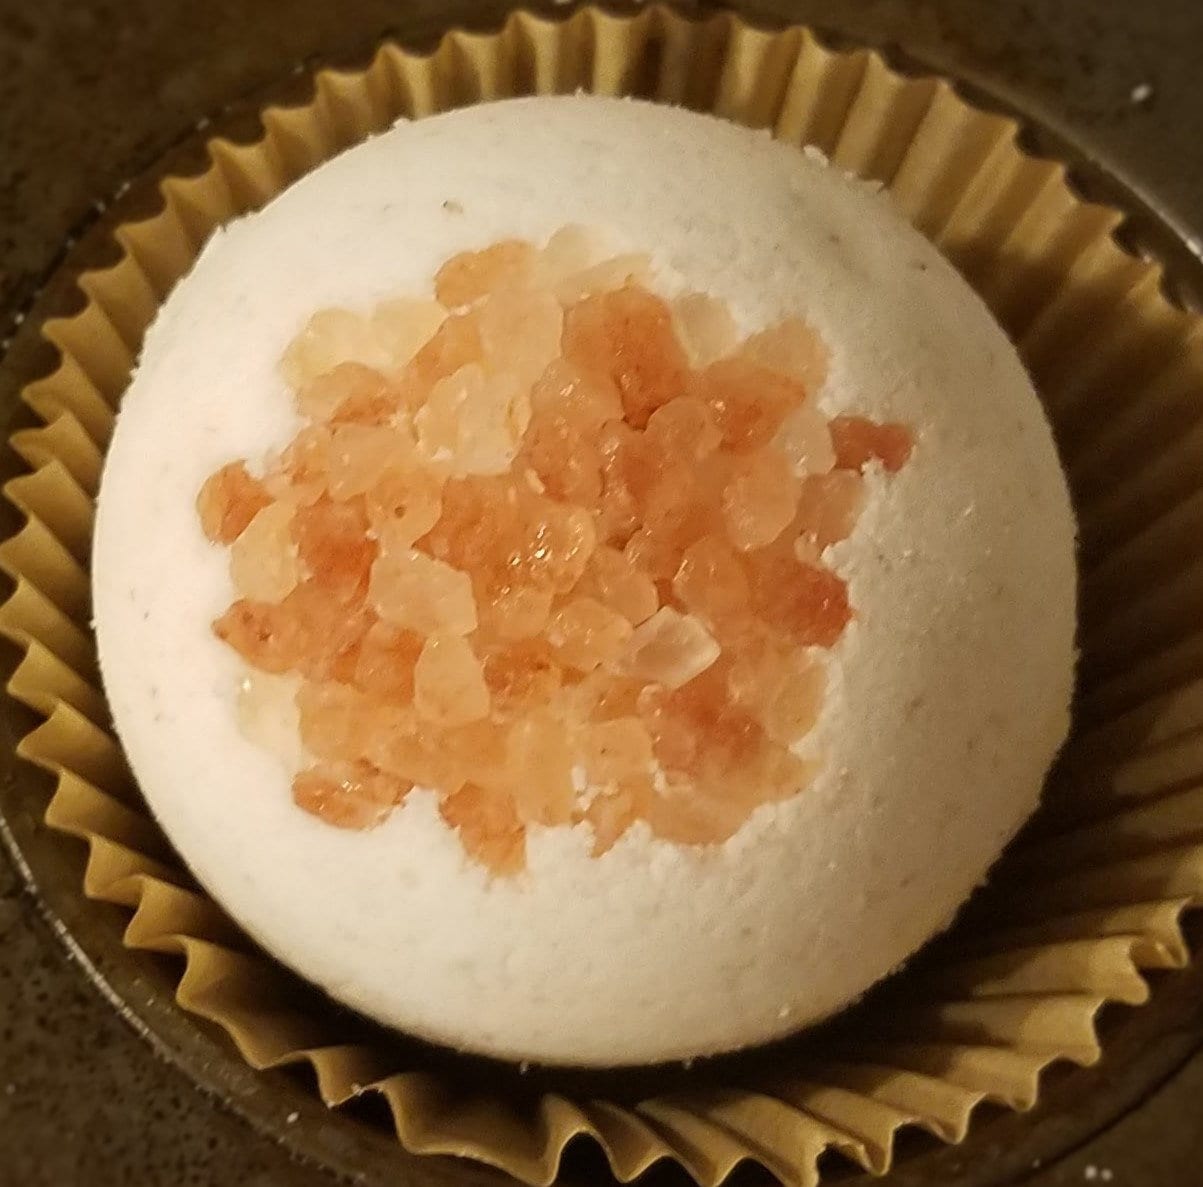 Ivy Creek Pink Himalayan Salt Bath Bombs - Natural Stress Relief Bath Fizzies for a Relaxing Spa Experience